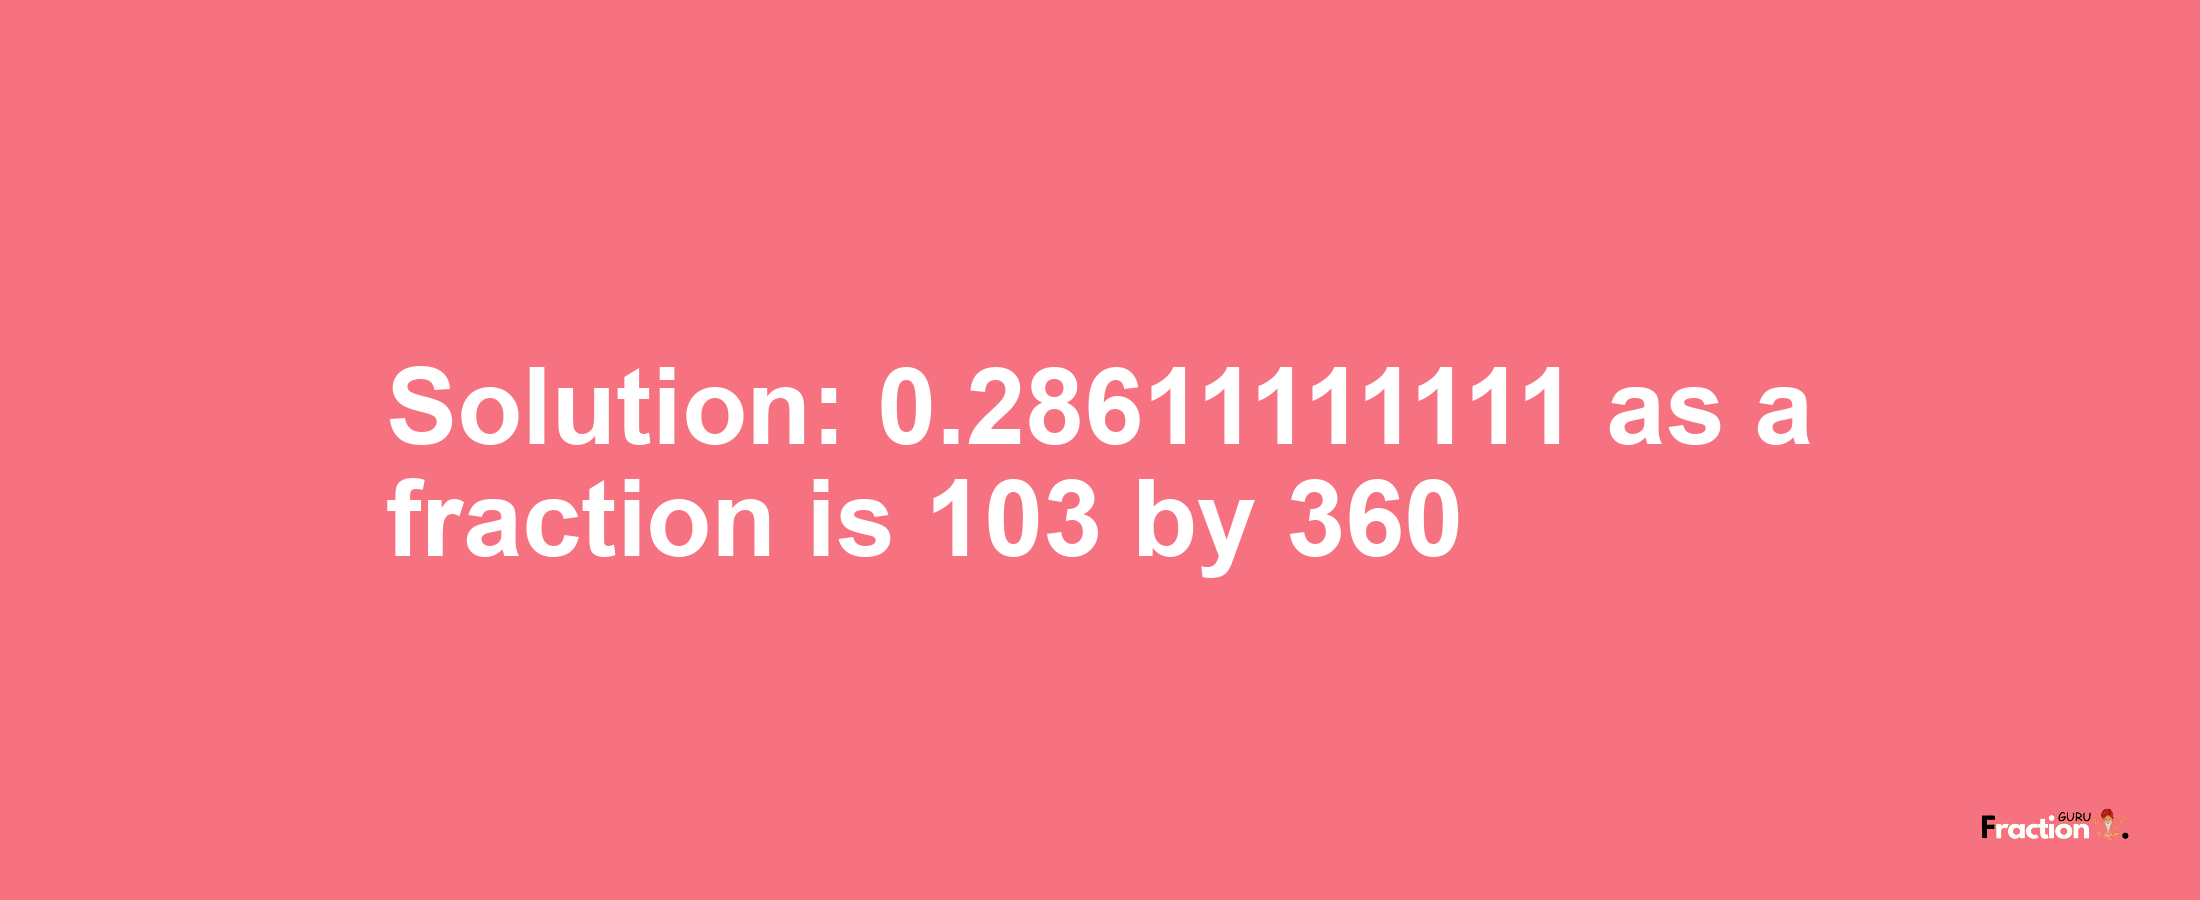 Solution:0.28611111111 as a fraction is 103/360